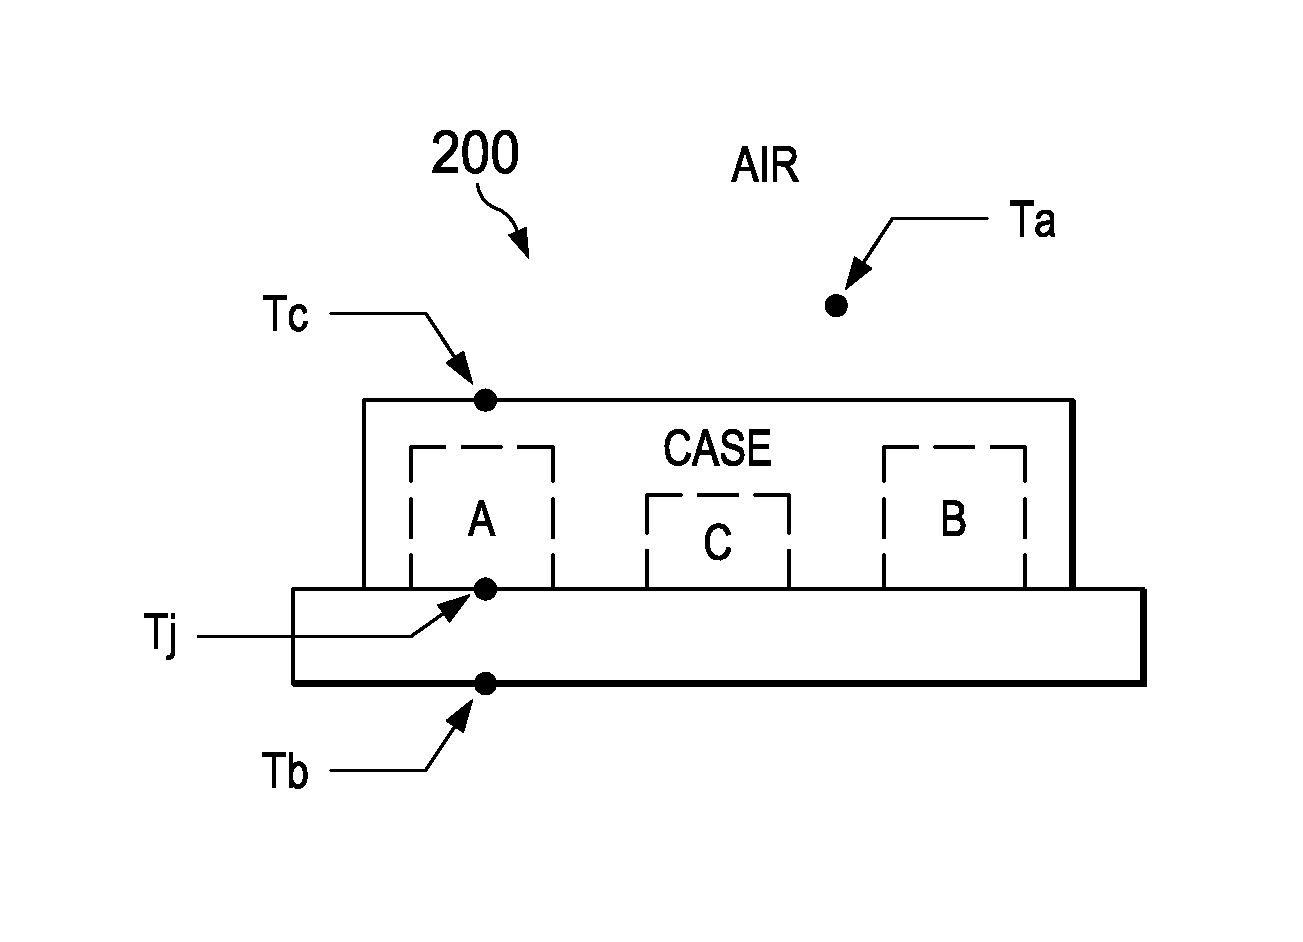 System and Method for Measuring Thermal Reliability of Multi-Chip Modules